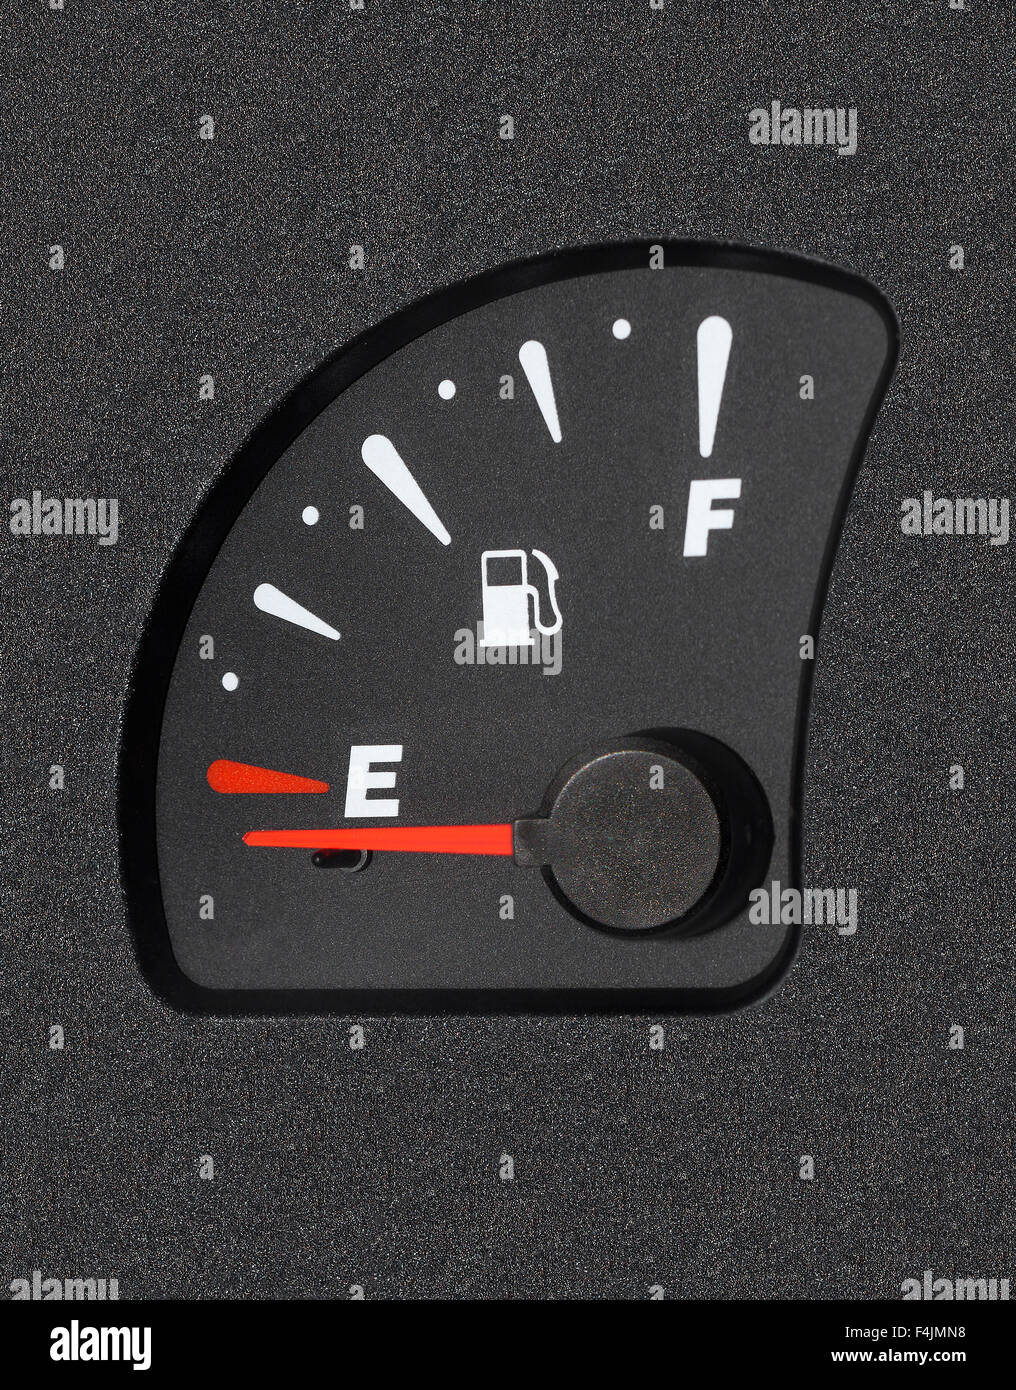 Fuel gauge of a car shows empty tank. Stock Photo